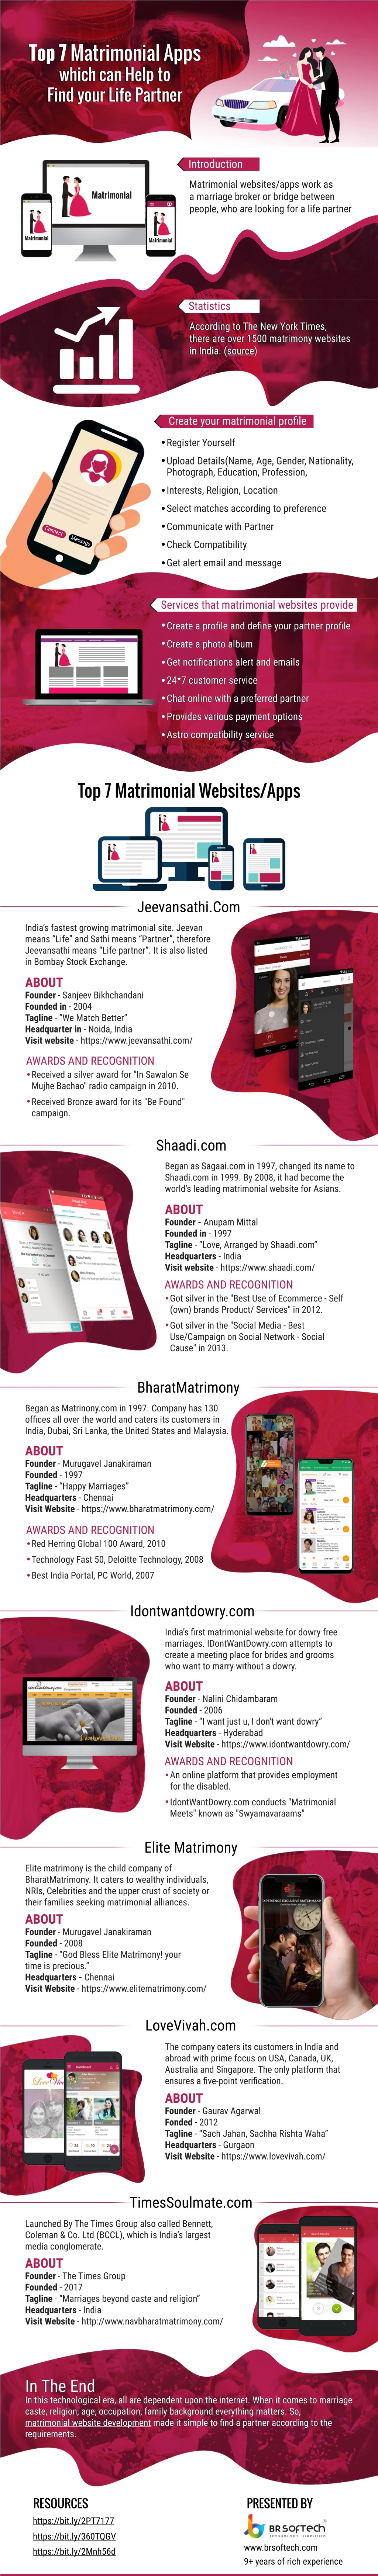 top 7 matrimonial apps which can help to find